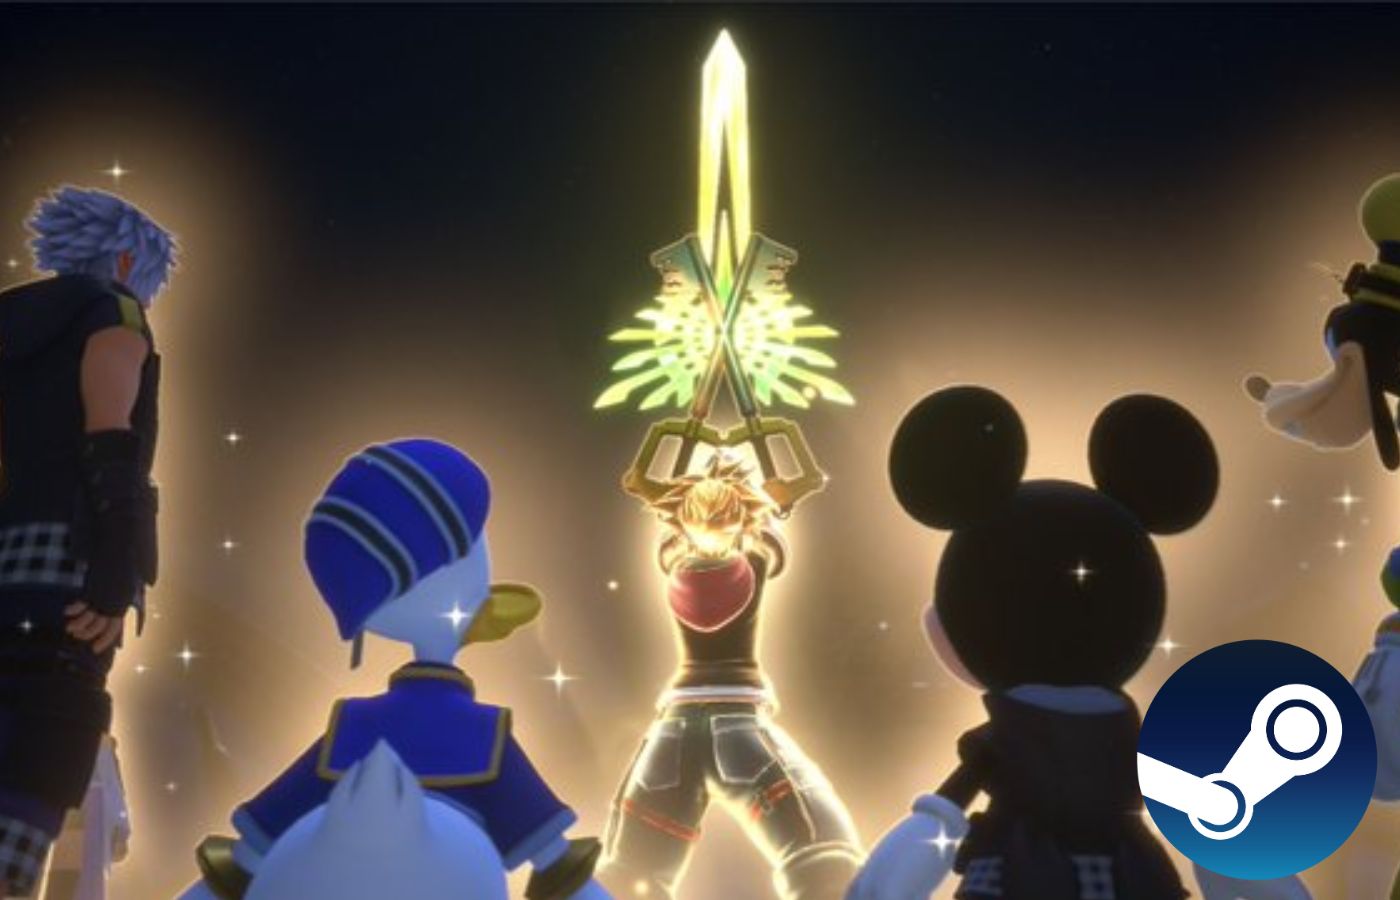 Where To Watch The Kingdom Hearts Steam Announcement Trailer – Release Date & Editions